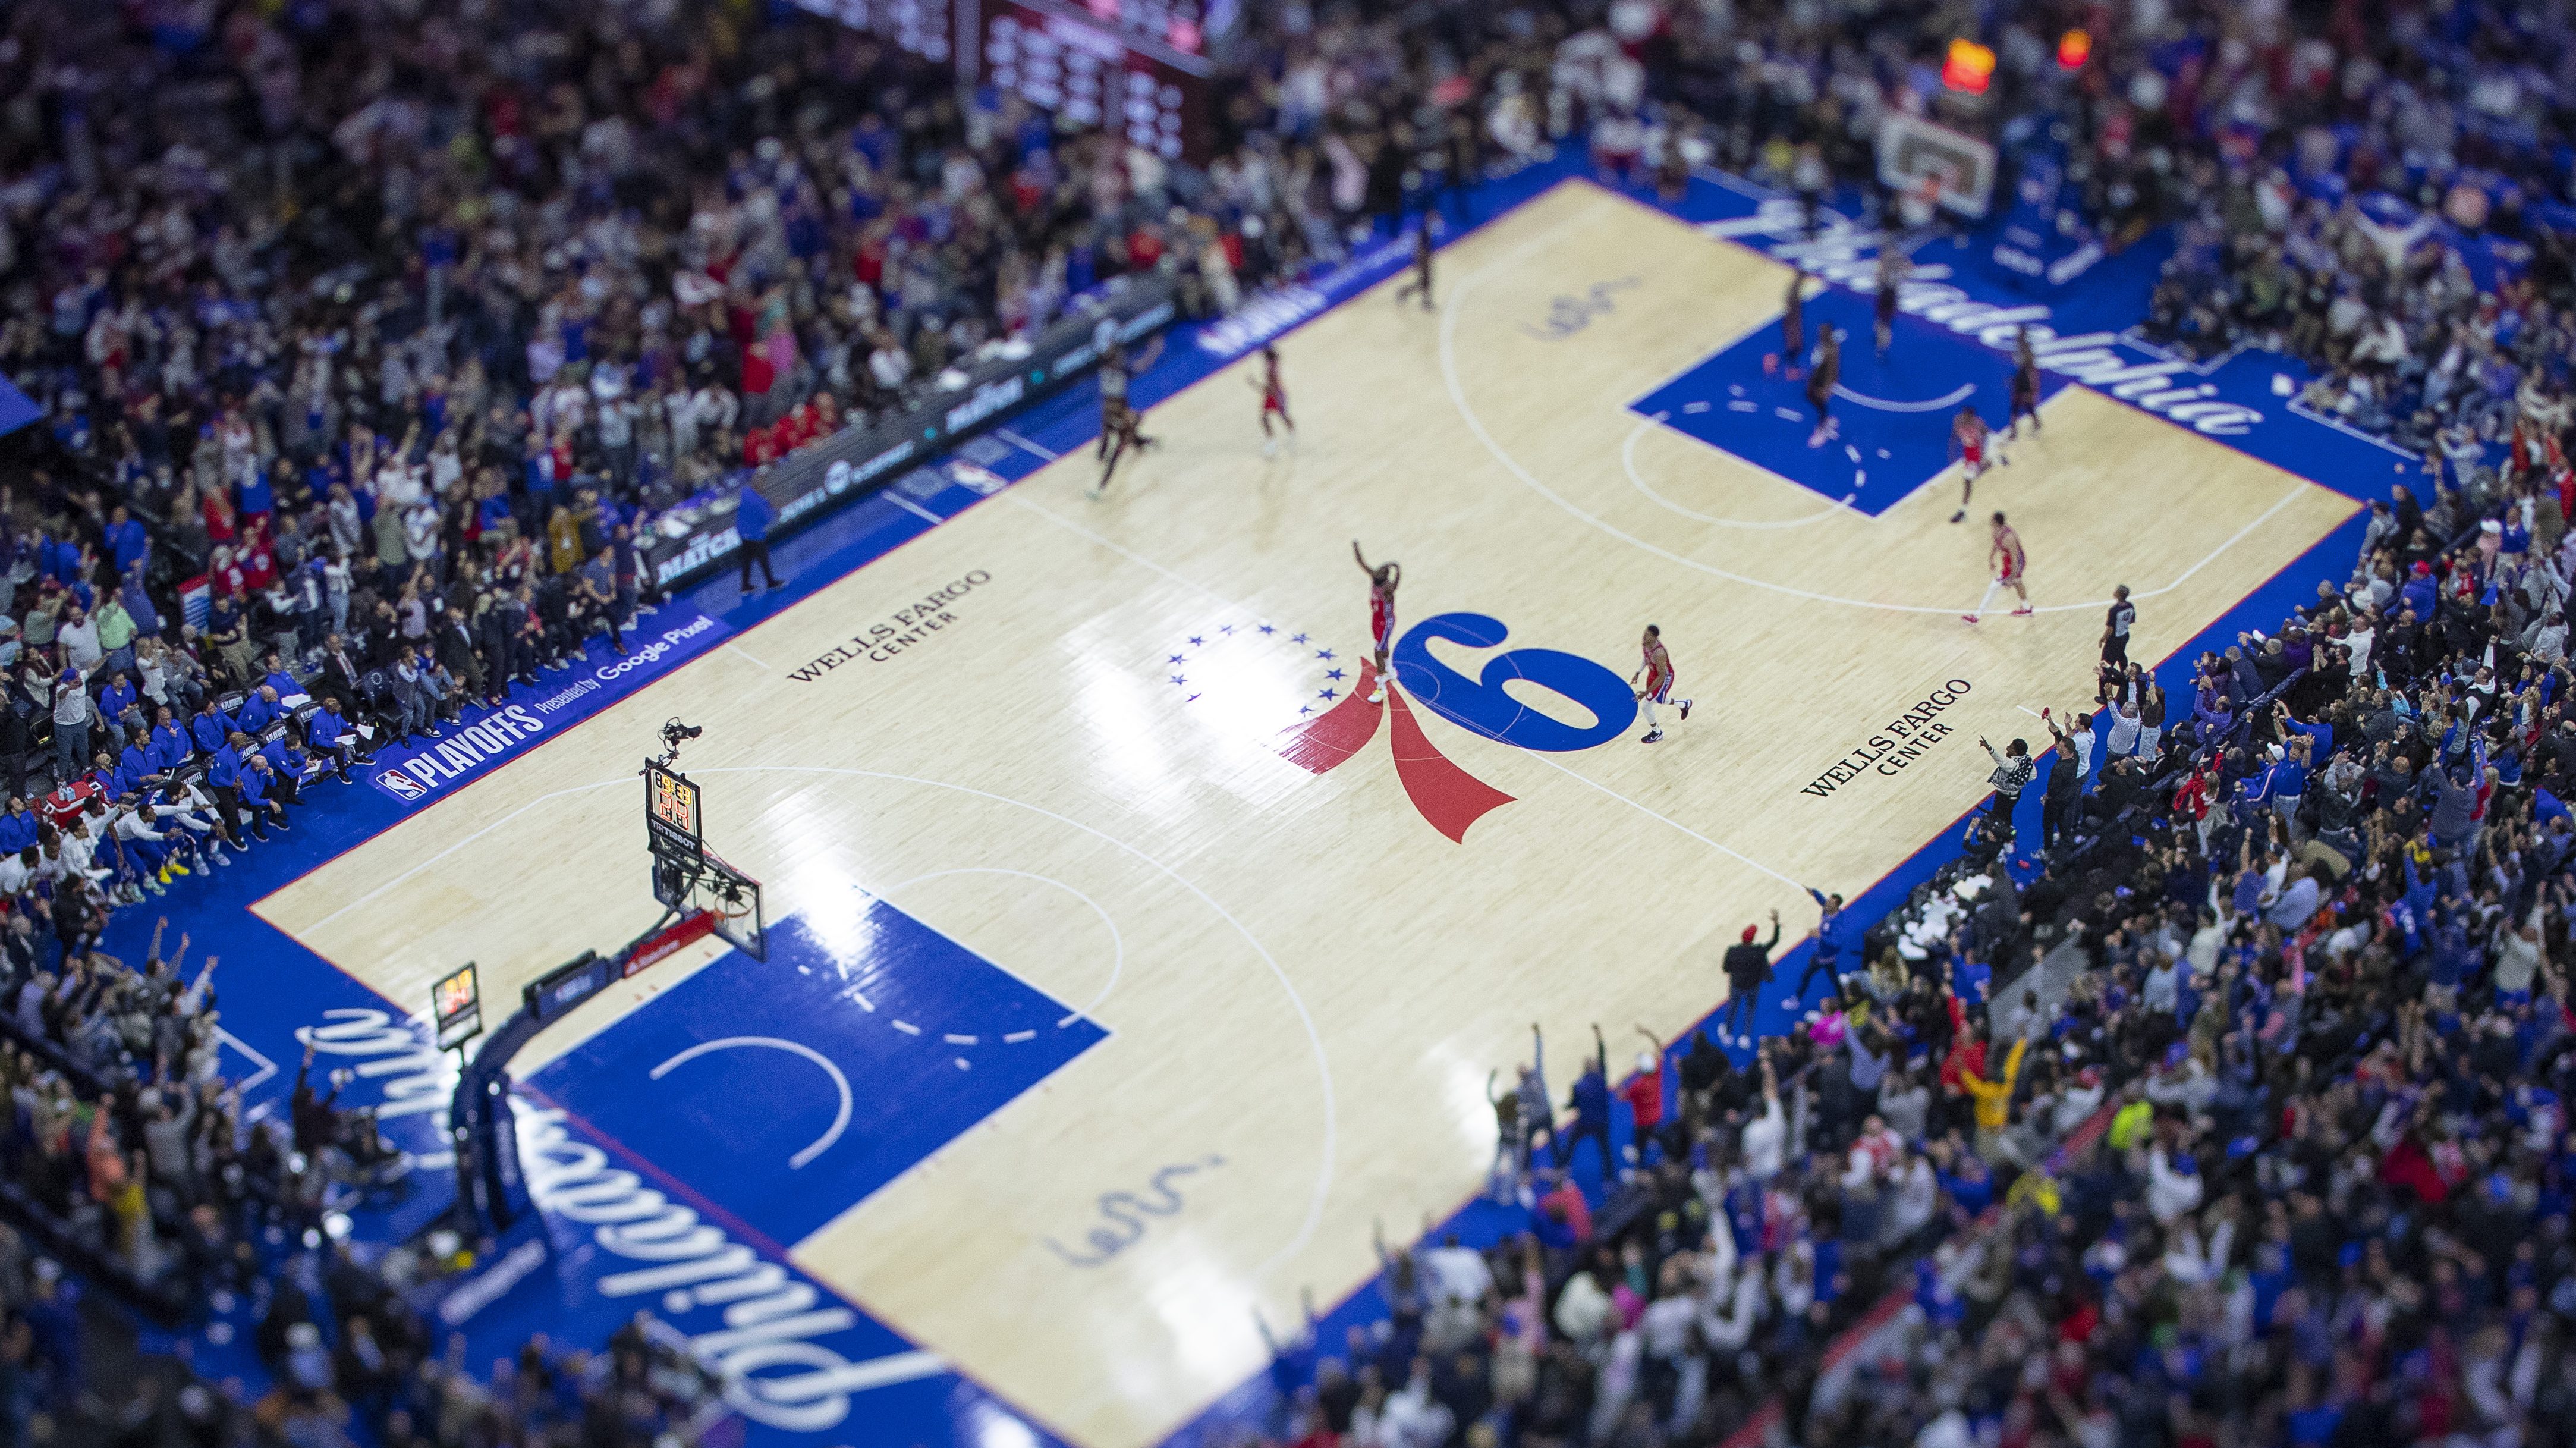 Philadelphia 76ers looking into building new privately funded arena